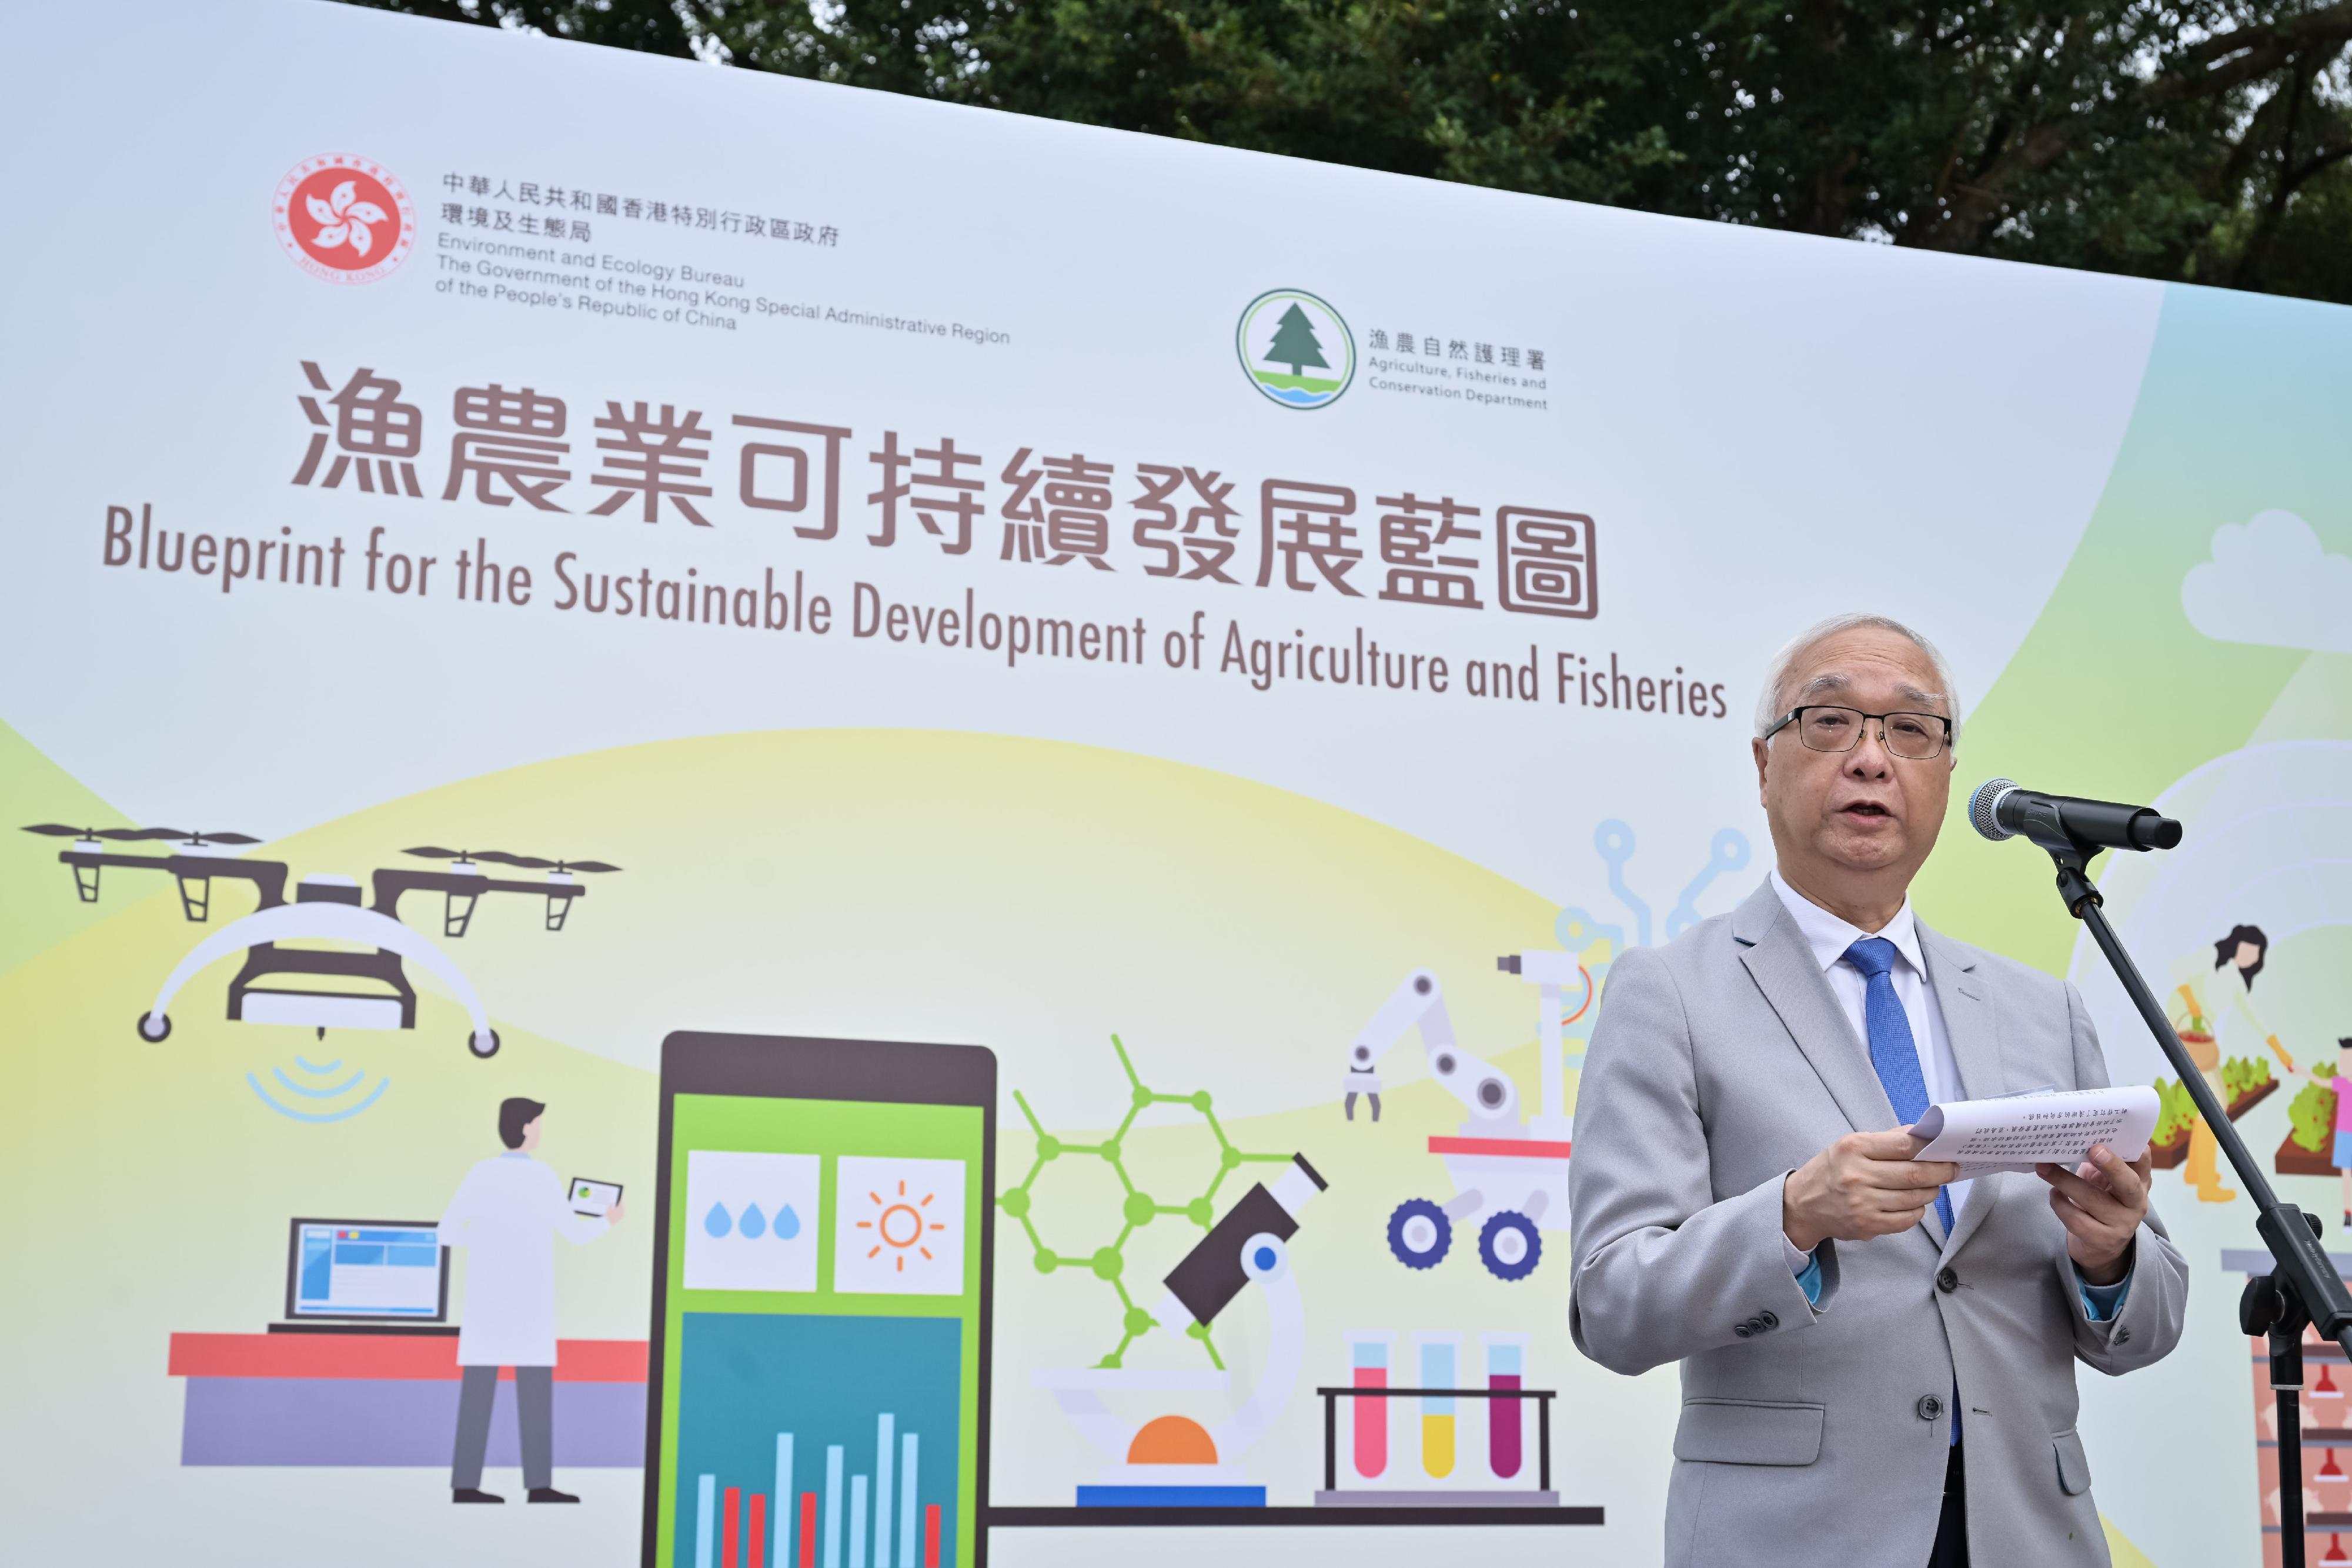 The Secretary for Environment and Ecology, Mr Tse Chin-wan, delivered a speech in the launch event for the Blueprint for the Sustainable Development of Agriculture and Fisheries today (December 14).